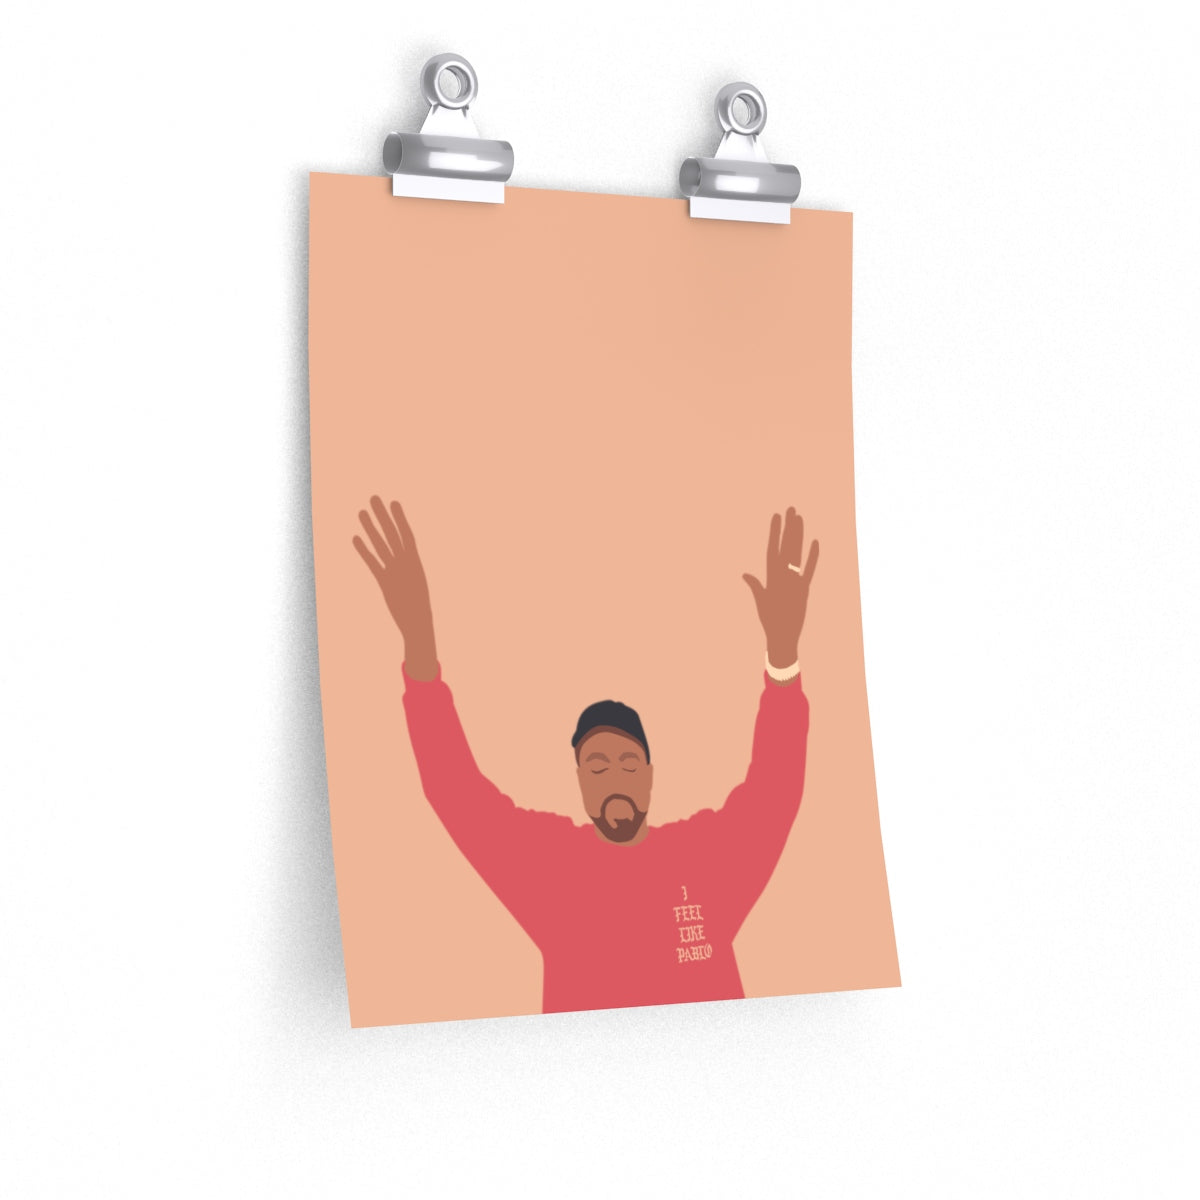 Kanye West I Feel Like Pablo Premium Matte vertical posters - The Life of Pablo TLOP tour merch inspired-9'' x 11''-CG Matt-Archethype